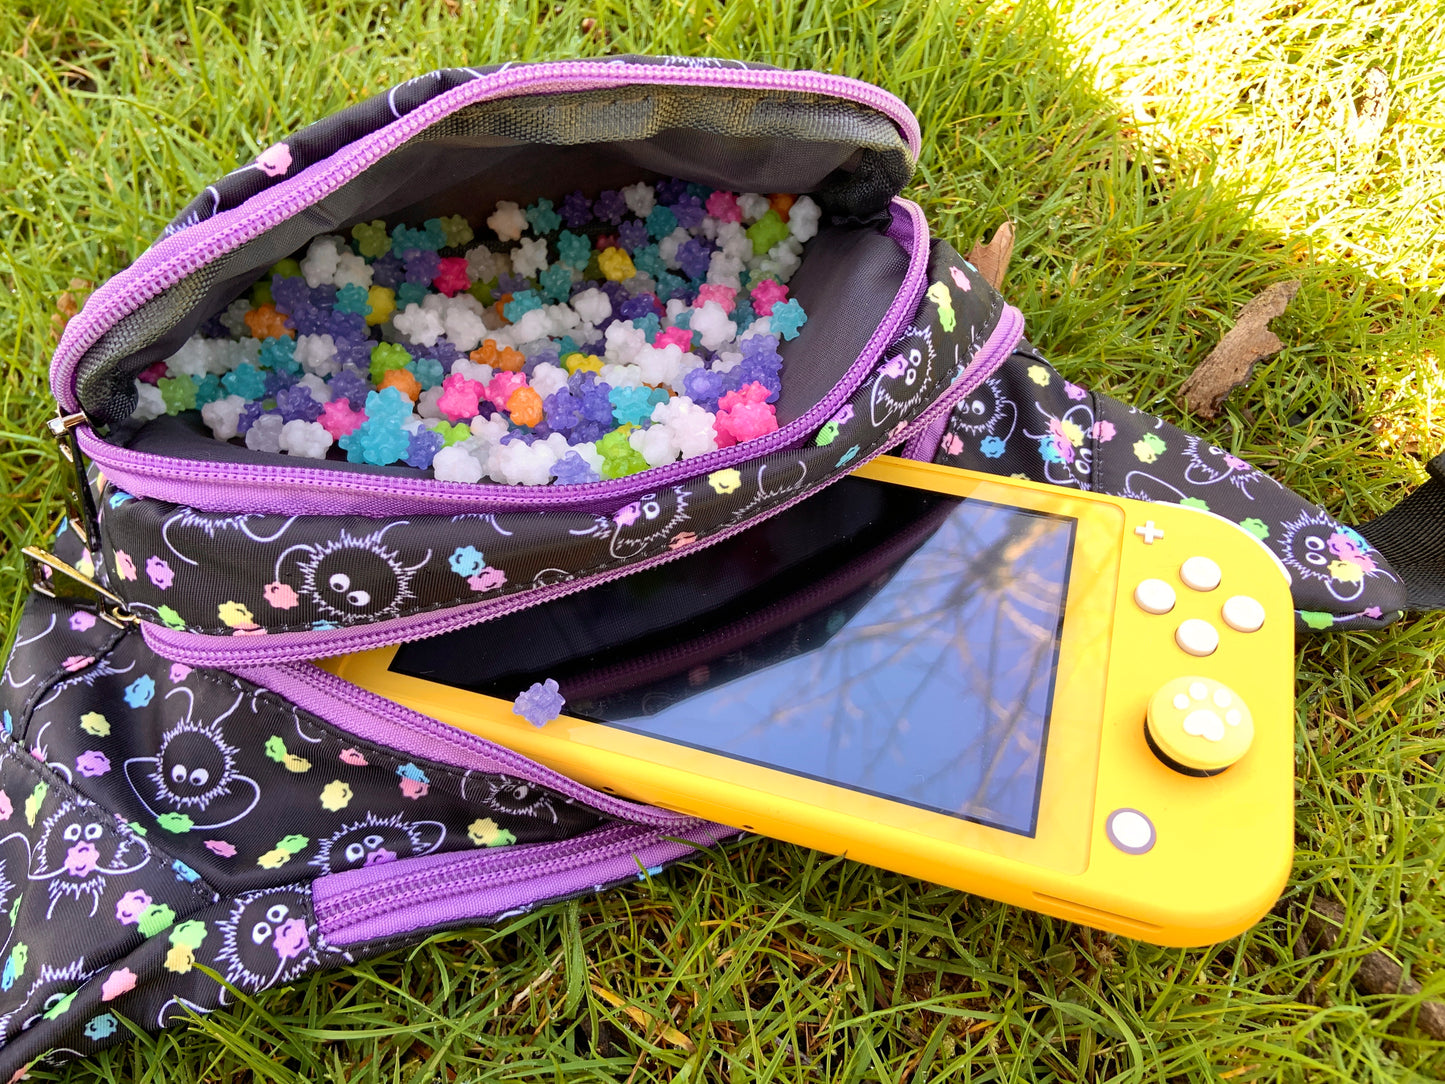 Soot Sprites Fanny Pack!